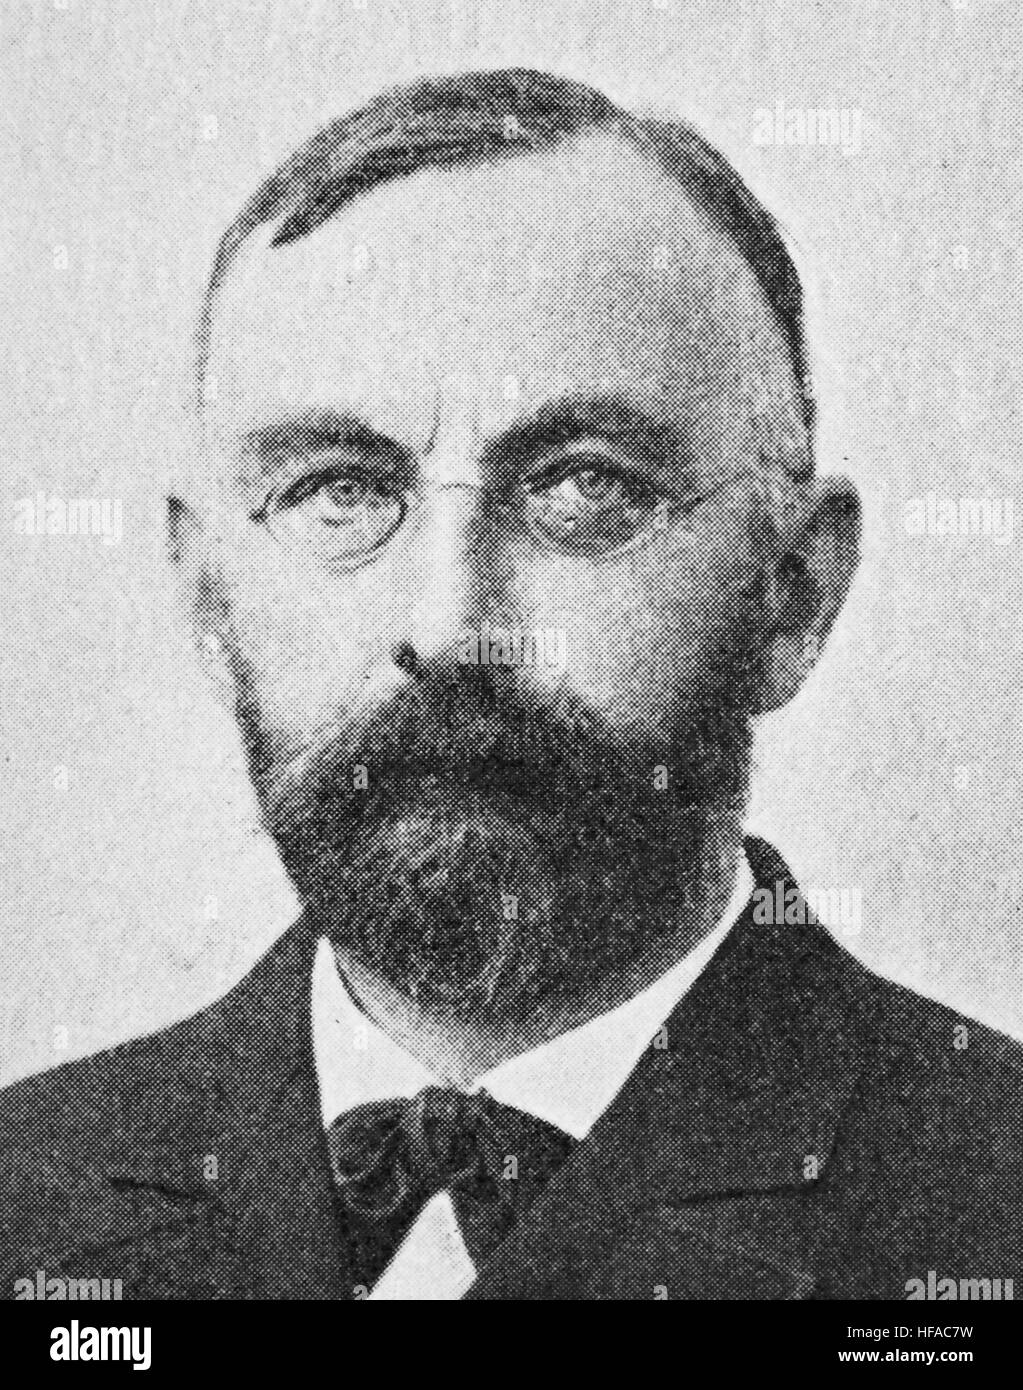 Karl Wilhelm Buecher, 1847-1930, was an economist, one of the founders of non-market economics, reproduction photo from the year 1895, digital improved Stock Photo